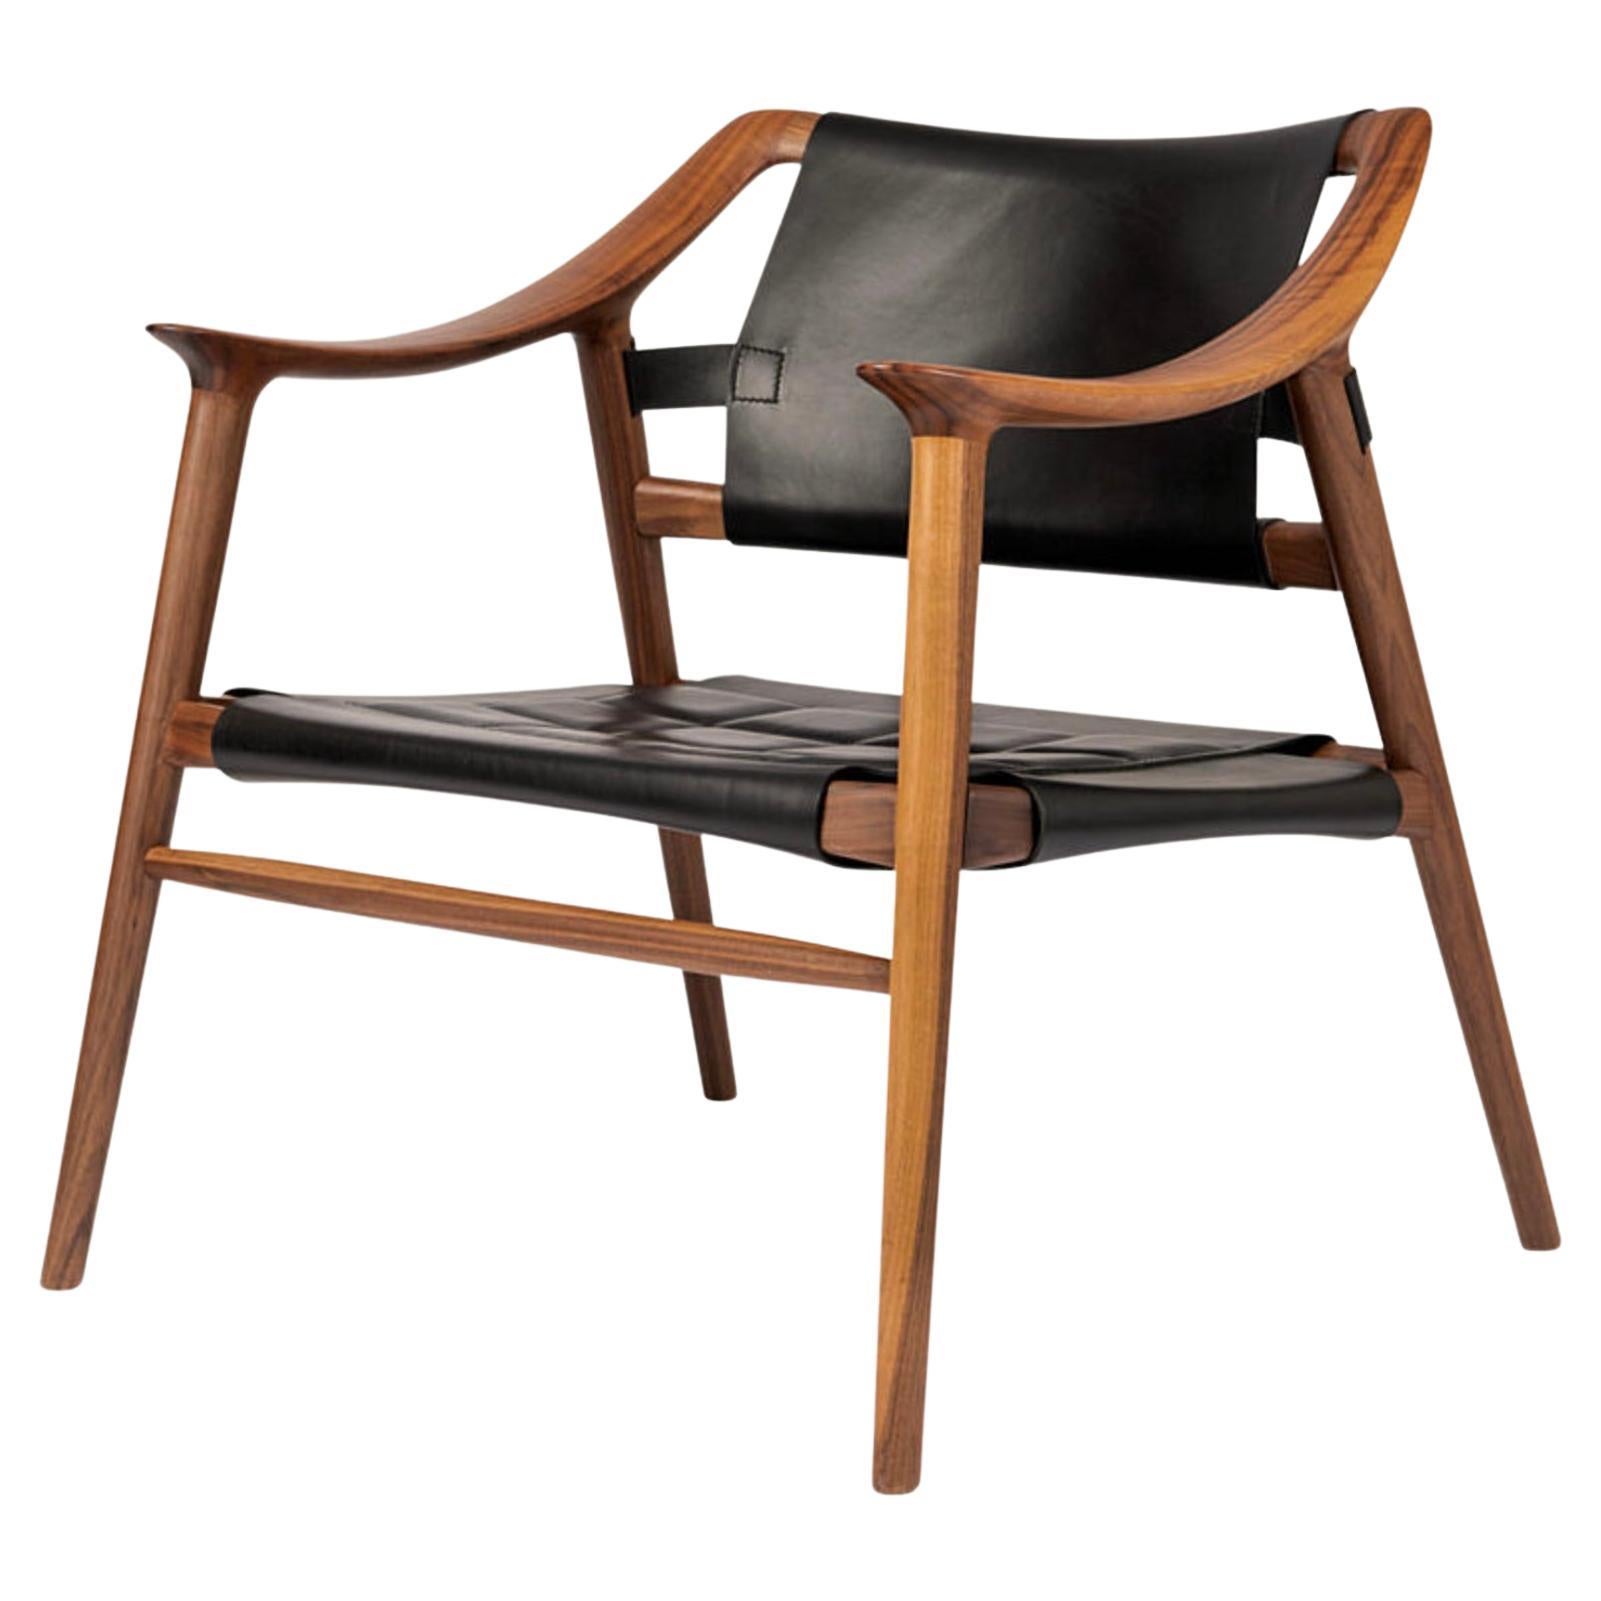 Rastad & Relling 'Bambi' 56/2 Lounge Chair in Solid Walnut 1956 for Fjordfiesta